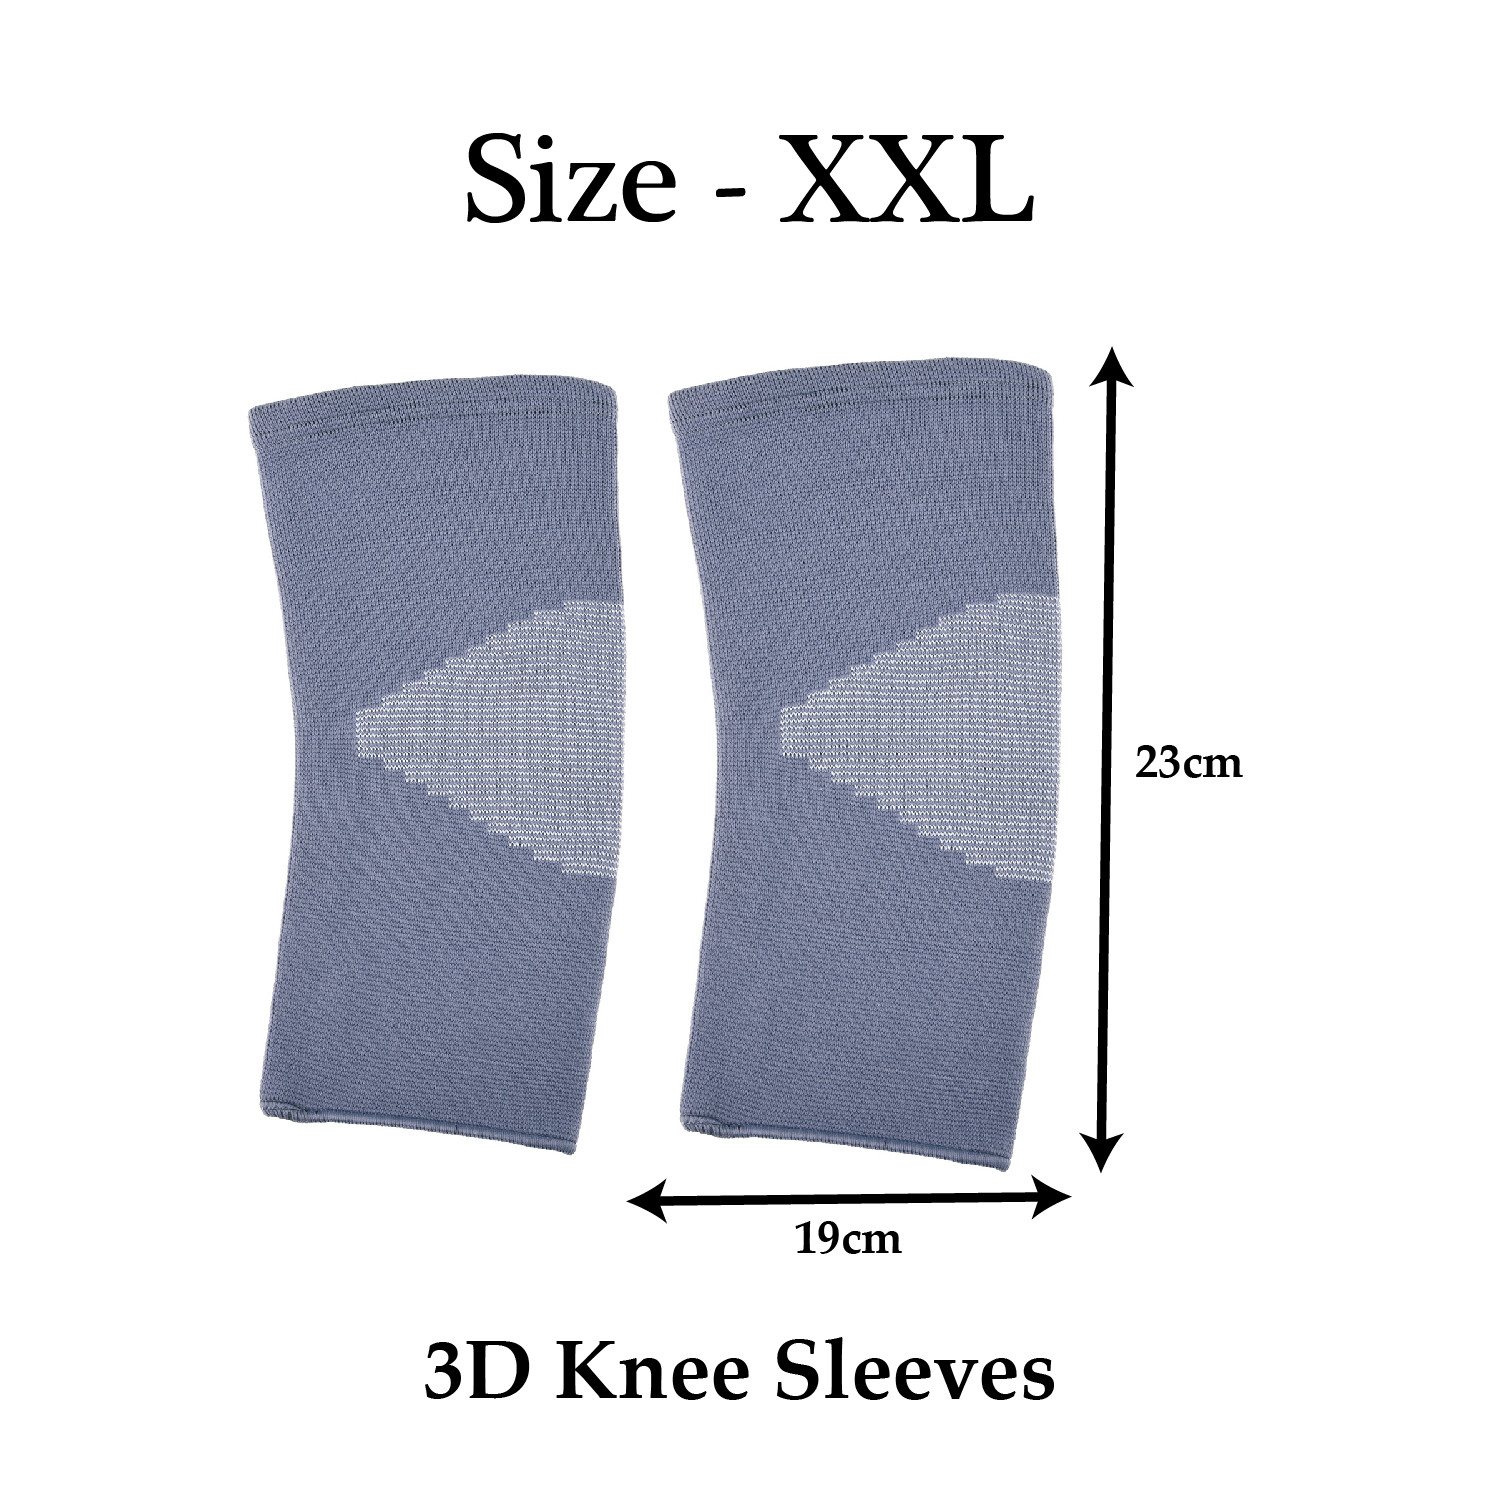 Kuber Industries 3D Knee Cap | Cotton Knee Sleeves |Sleeves For Joint Pain | Sleeves For Arthritis Relief | Unisex Knee Wraps | Knee Bands |Size-XXL | 1 Pair | Gray & White